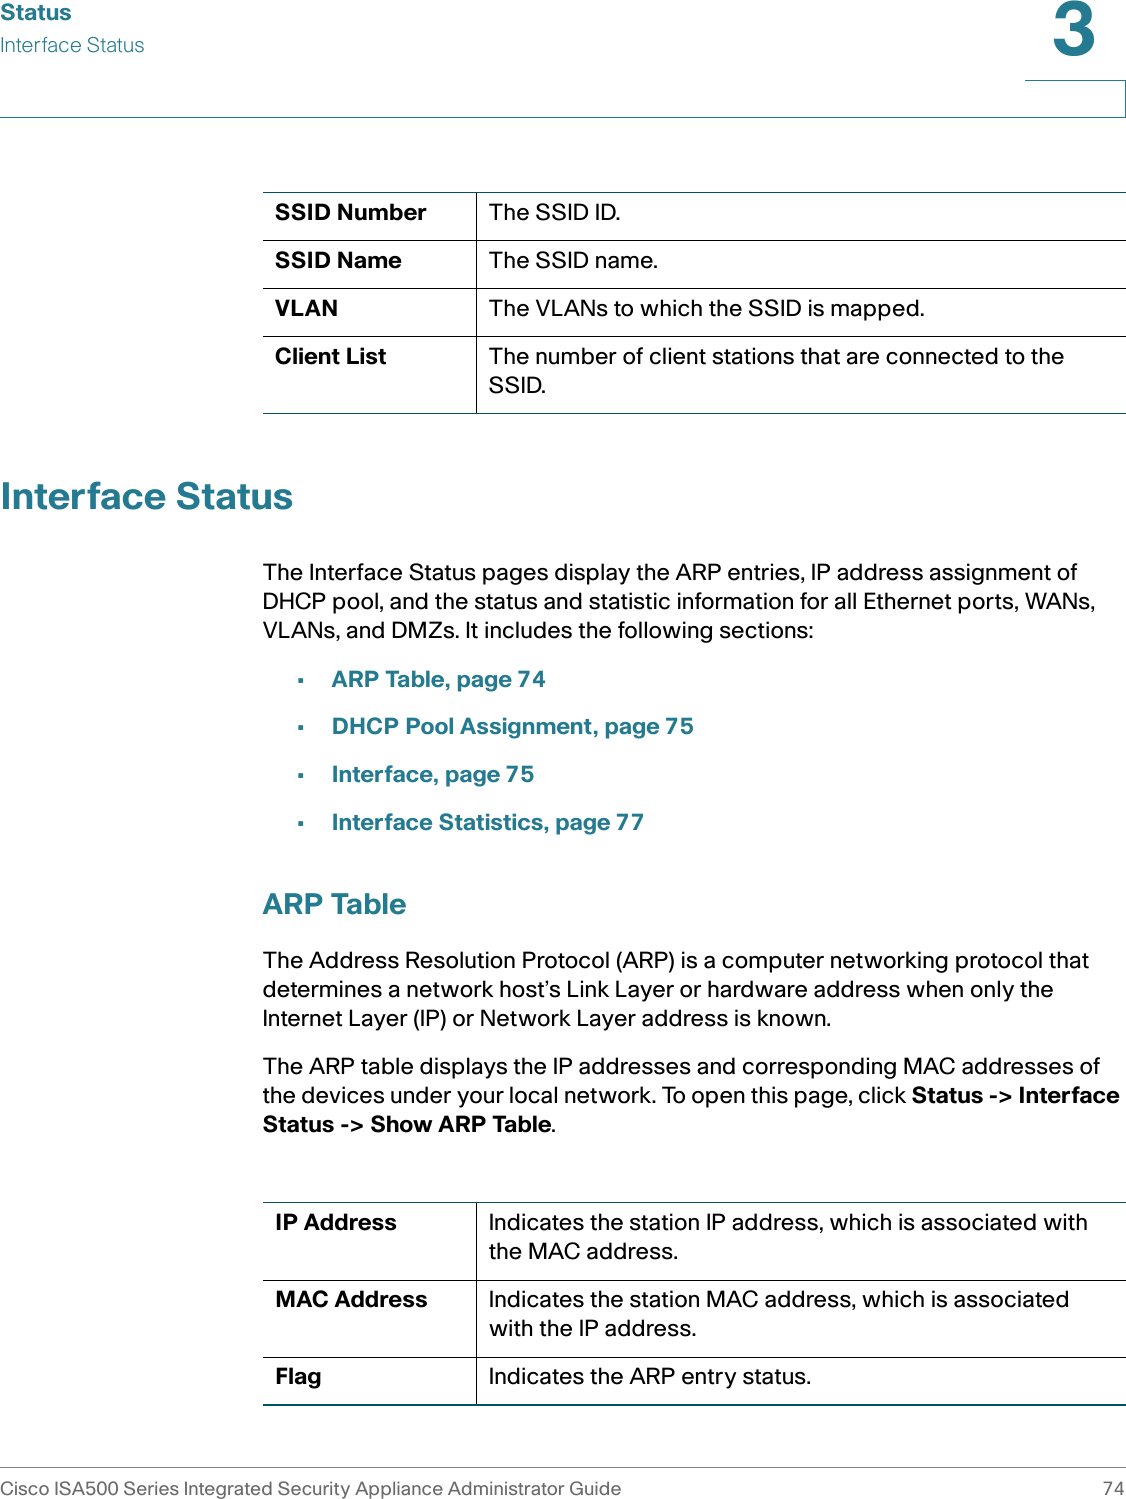 StatusInterface StatusCisco ISA500 Series Integrated Security Appliance Administrator Guide 743 Interface StatusThe Interface Status pages display the ARP entries, IP address assignment of DHCP pool, and the status and statistic information for all Ethernet ports, WANs, VLANs, and DMZs. It includes the following sections: •ARP Table, page 74•DHCP Pool Assignment, page 75•Interface, page 75•Interface Statistics, page 77ARP TableThe Address Resolution Protocol (ARP) is a computer networking protocol that determines a network host’s Link Layer or hardware address when only the Internet Layer (IP) or Network Layer address is known.The ARP table displays the IP addresses and corresponding MAC addresses of the devices under your local network. To open this page, click Status -&gt; Interface Status -&gt; Show ARP Table. SSID Number The SSID ID.SSID Name The SSID name.VLAN The VLANs to which the SSID is mapped.Client List The number of client stations that are connected to the SSID.IP Address Indicates the station IP address, which is associated with the MAC address.MAC Address Indicates the station MAC address, which is associated with the IP address.Flag Indicates the ARP entry status. 